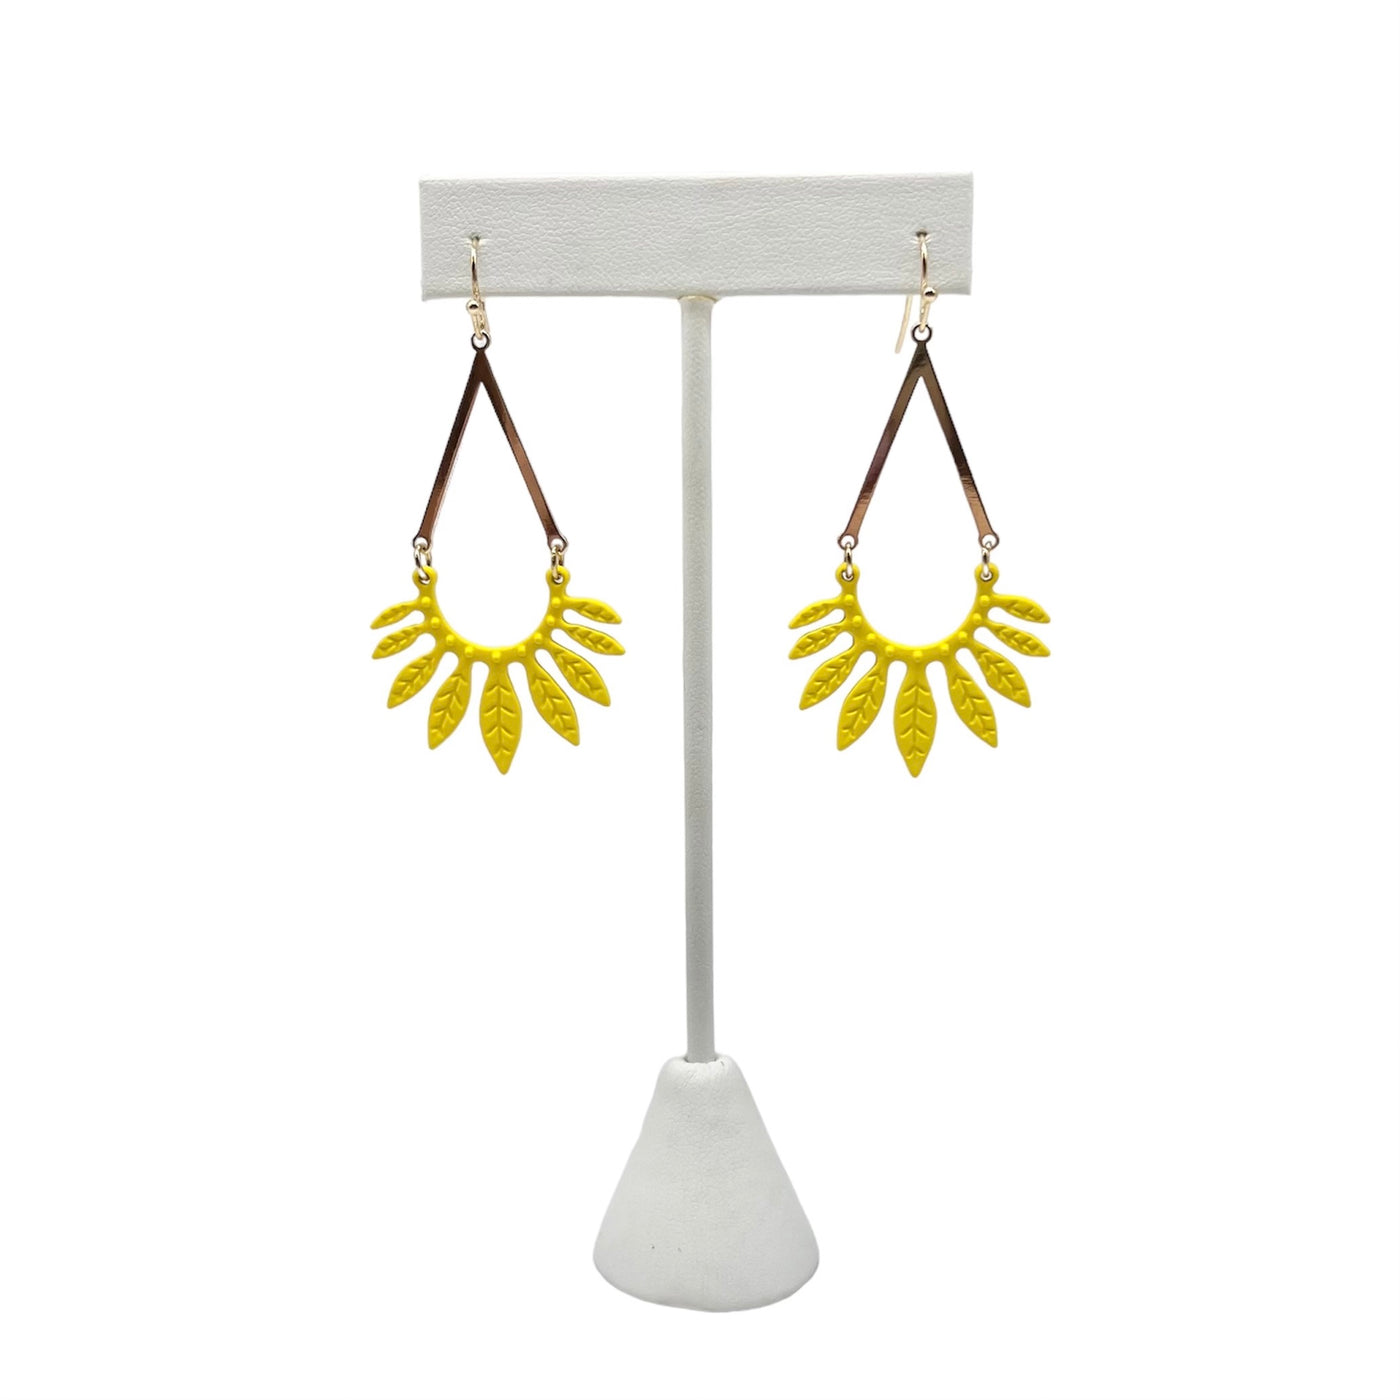 Yellow Leaf accented earrings